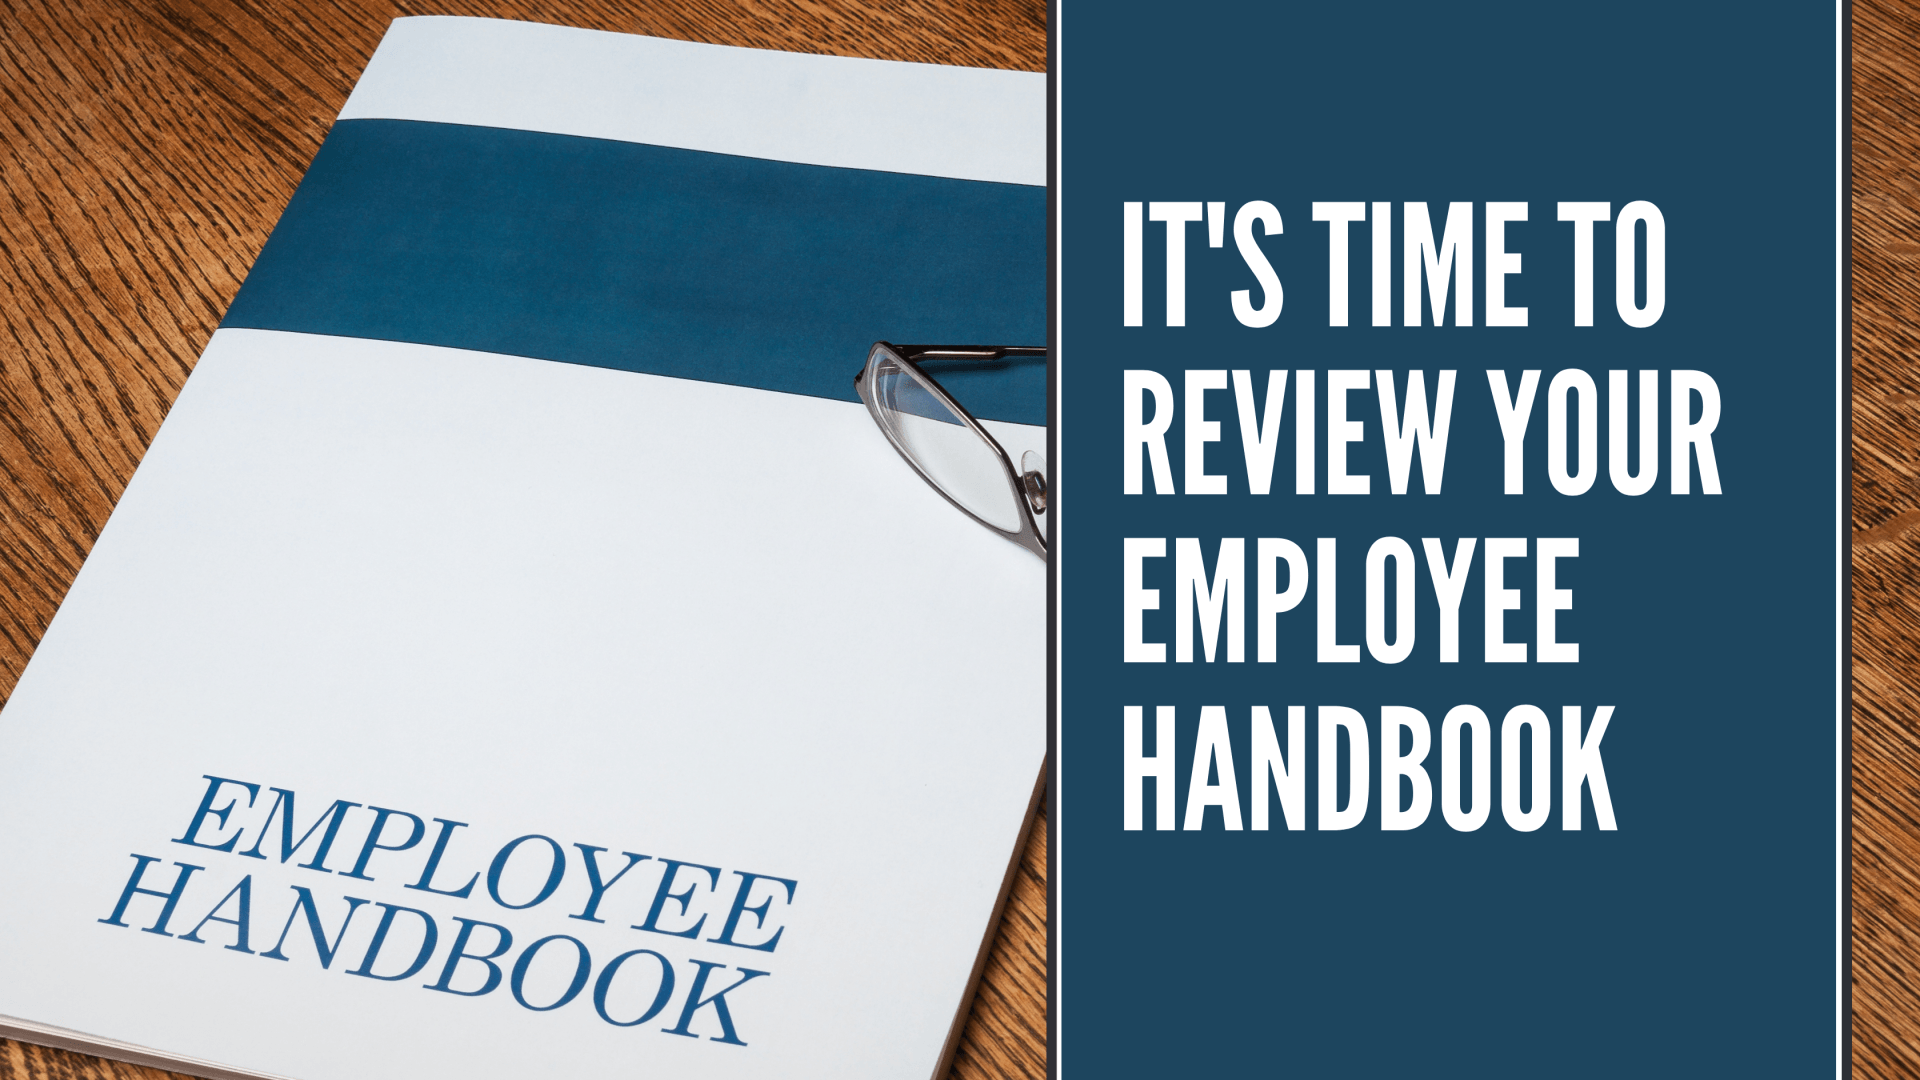 It’s Time to Review Your Employee Handbook